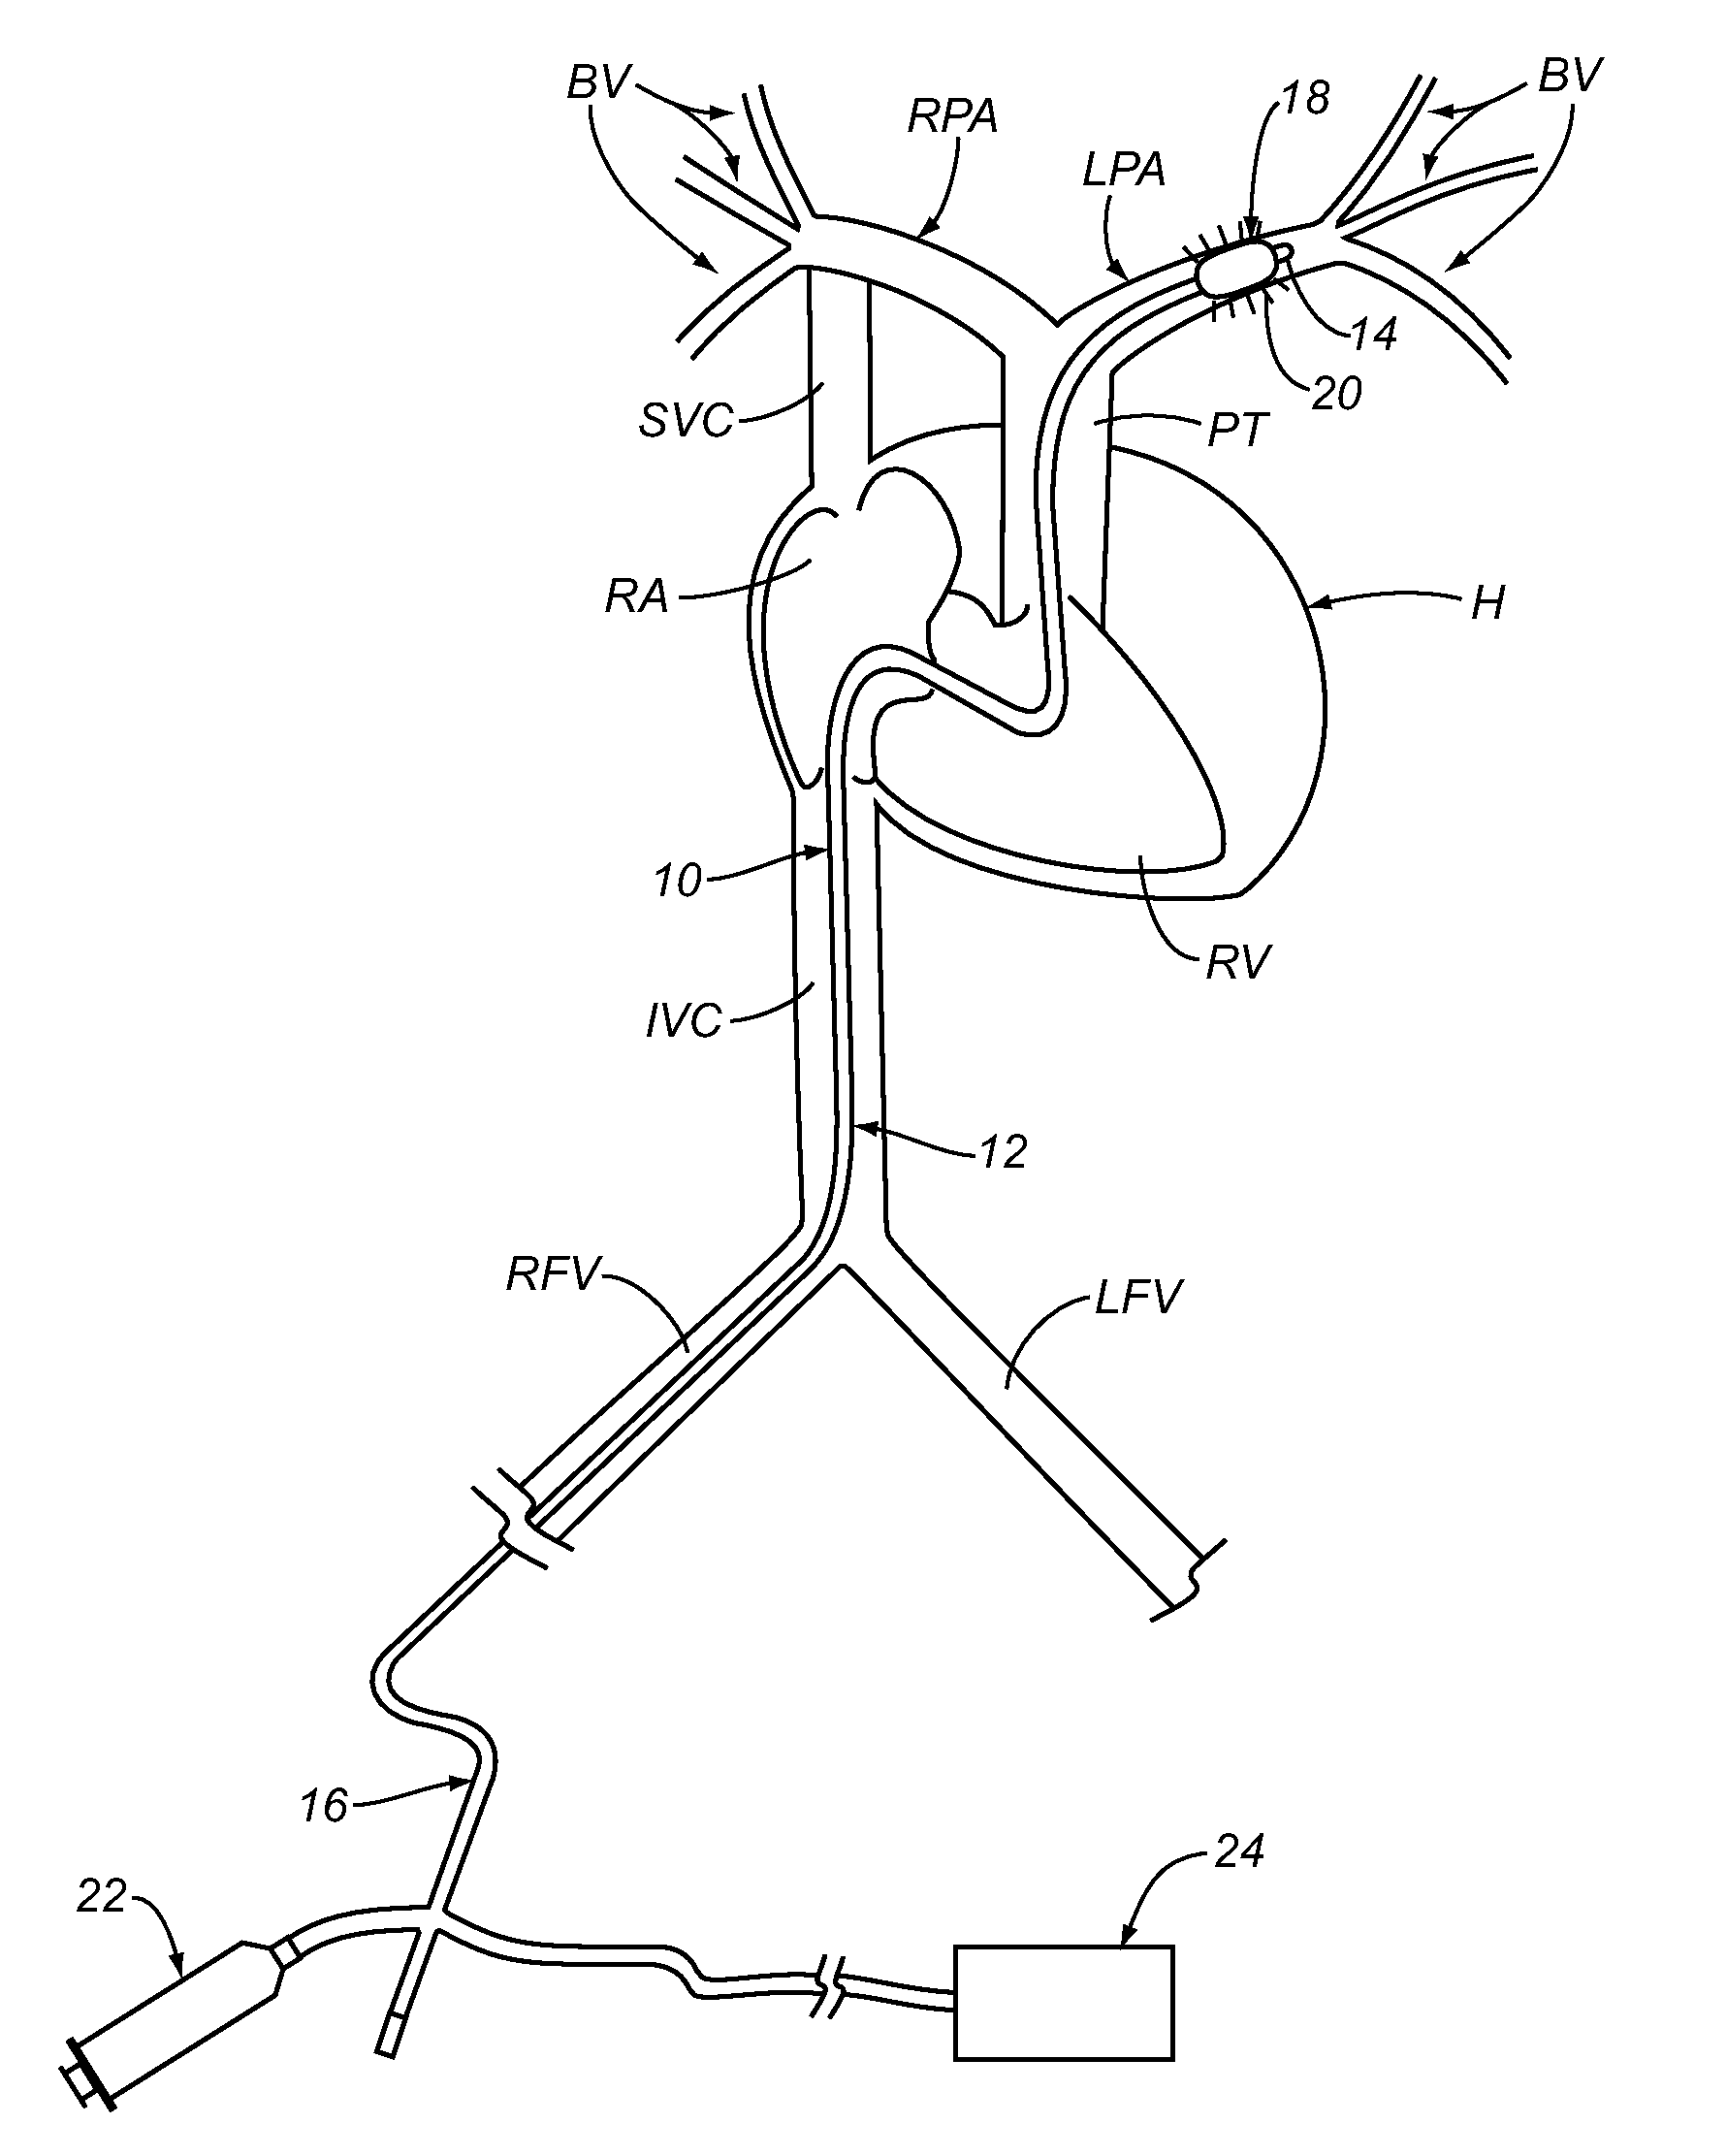 Apparatus and methods for treating pulmonary hypertension